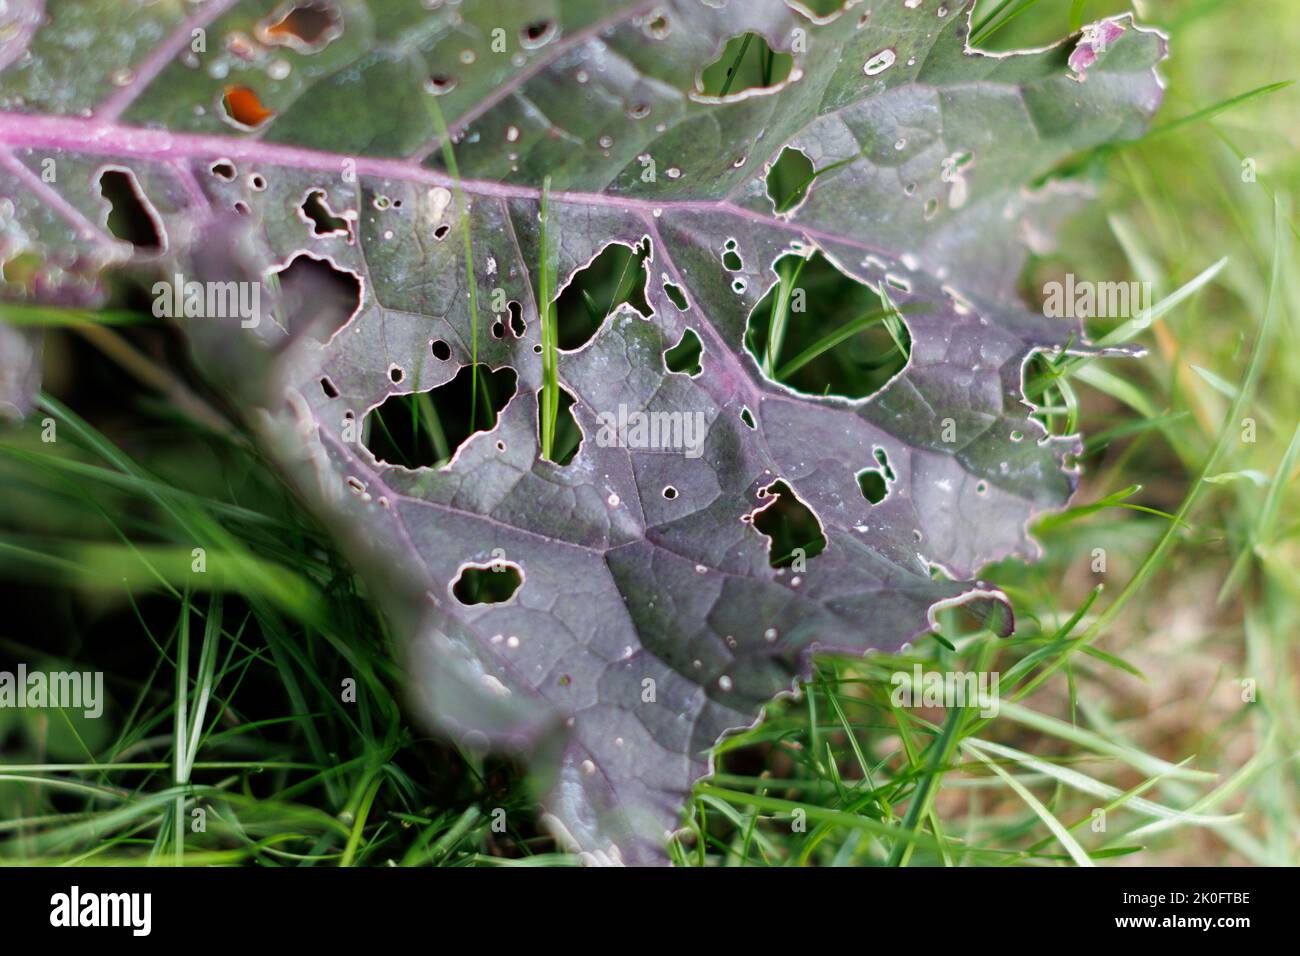 Close up of holes made by Cabbage White Caterpillar damage to Brassica (Kale) leaves. Stock Photo